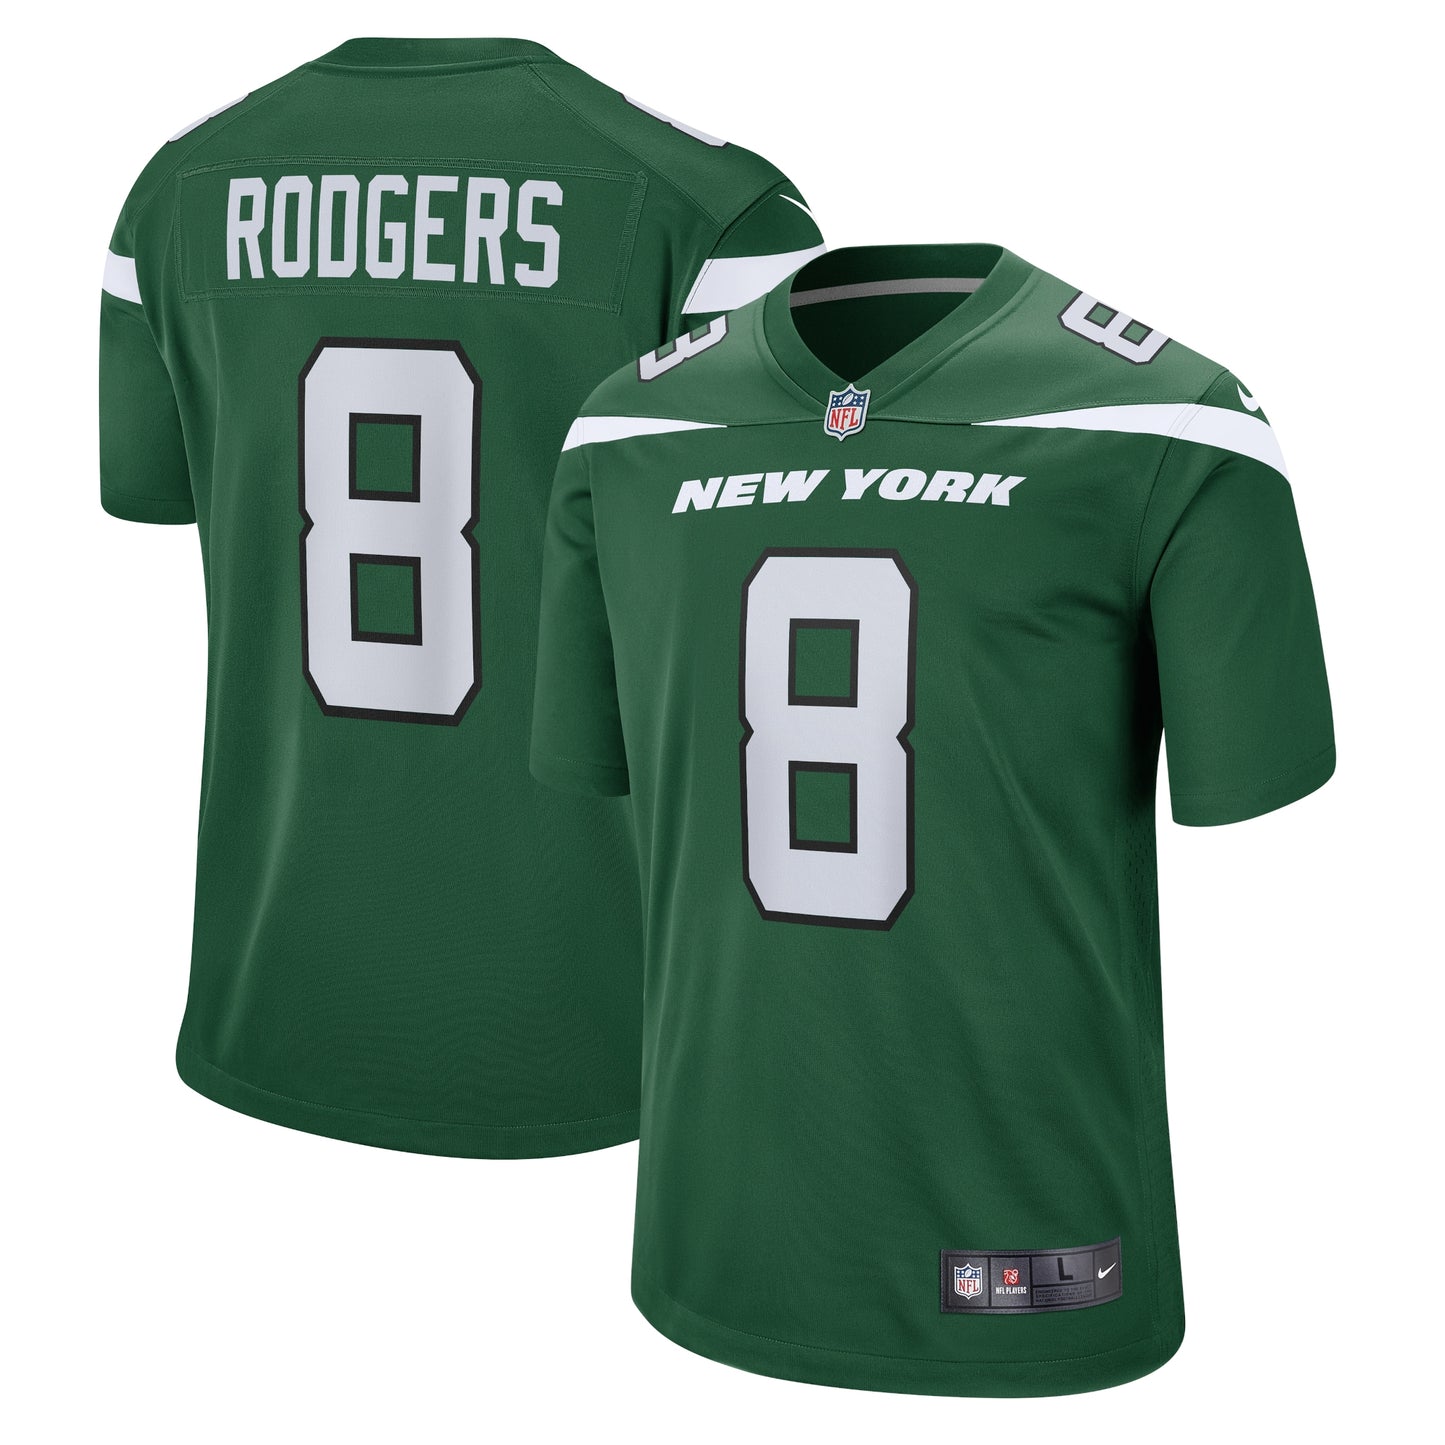 Aaron Rodgers New York Jets Nike Game Jersey - Gotham Green